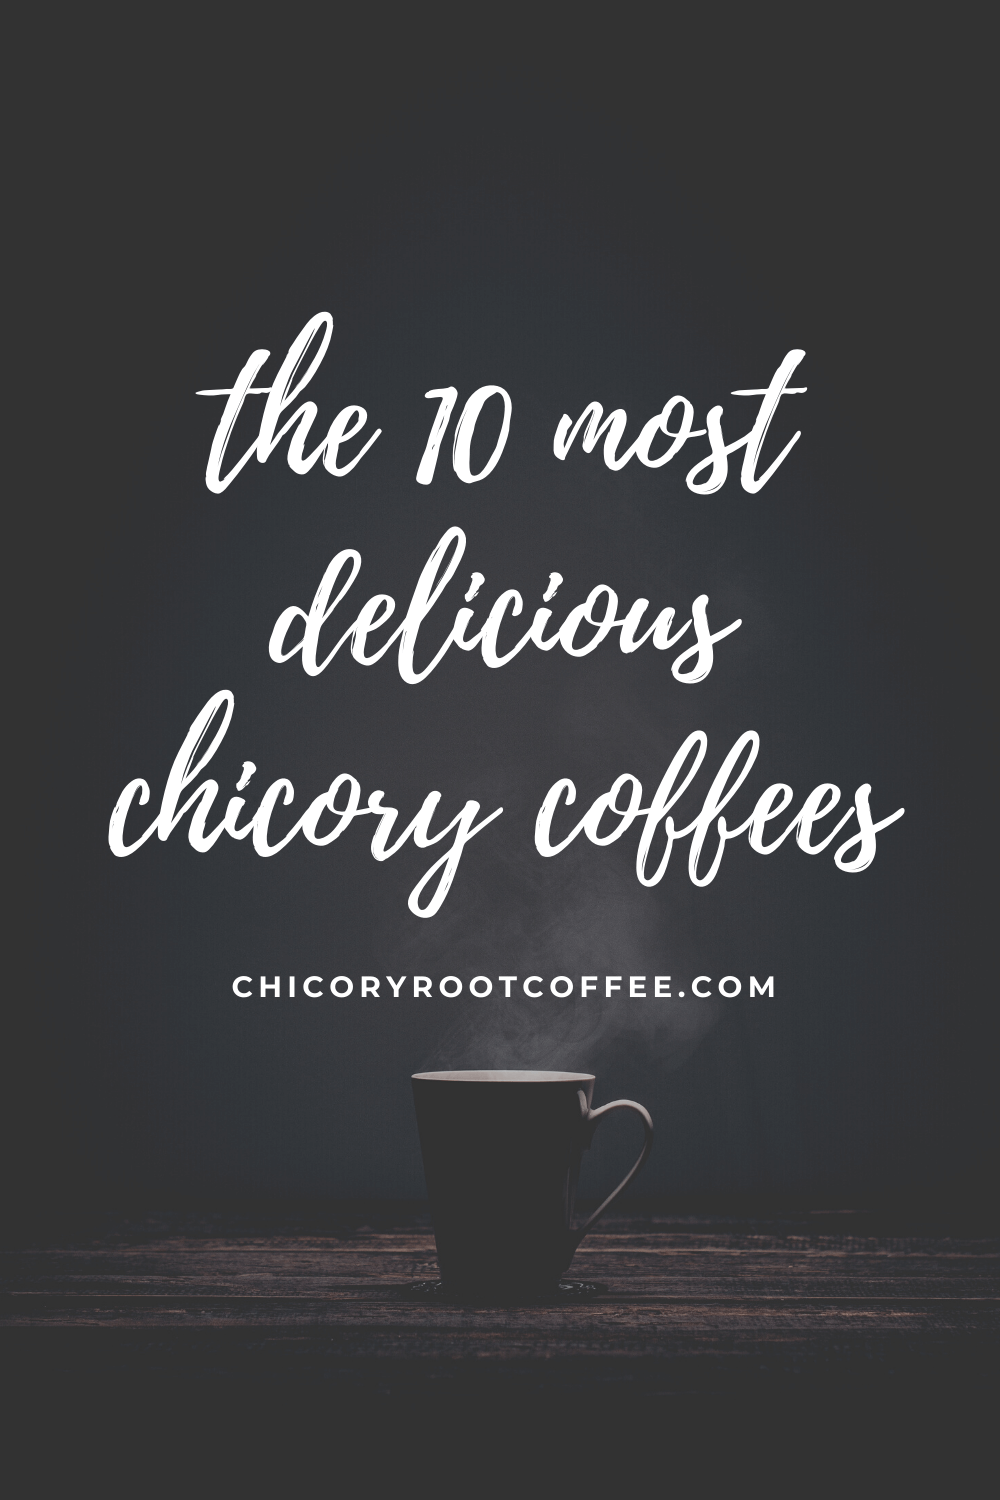 best chicory coffees